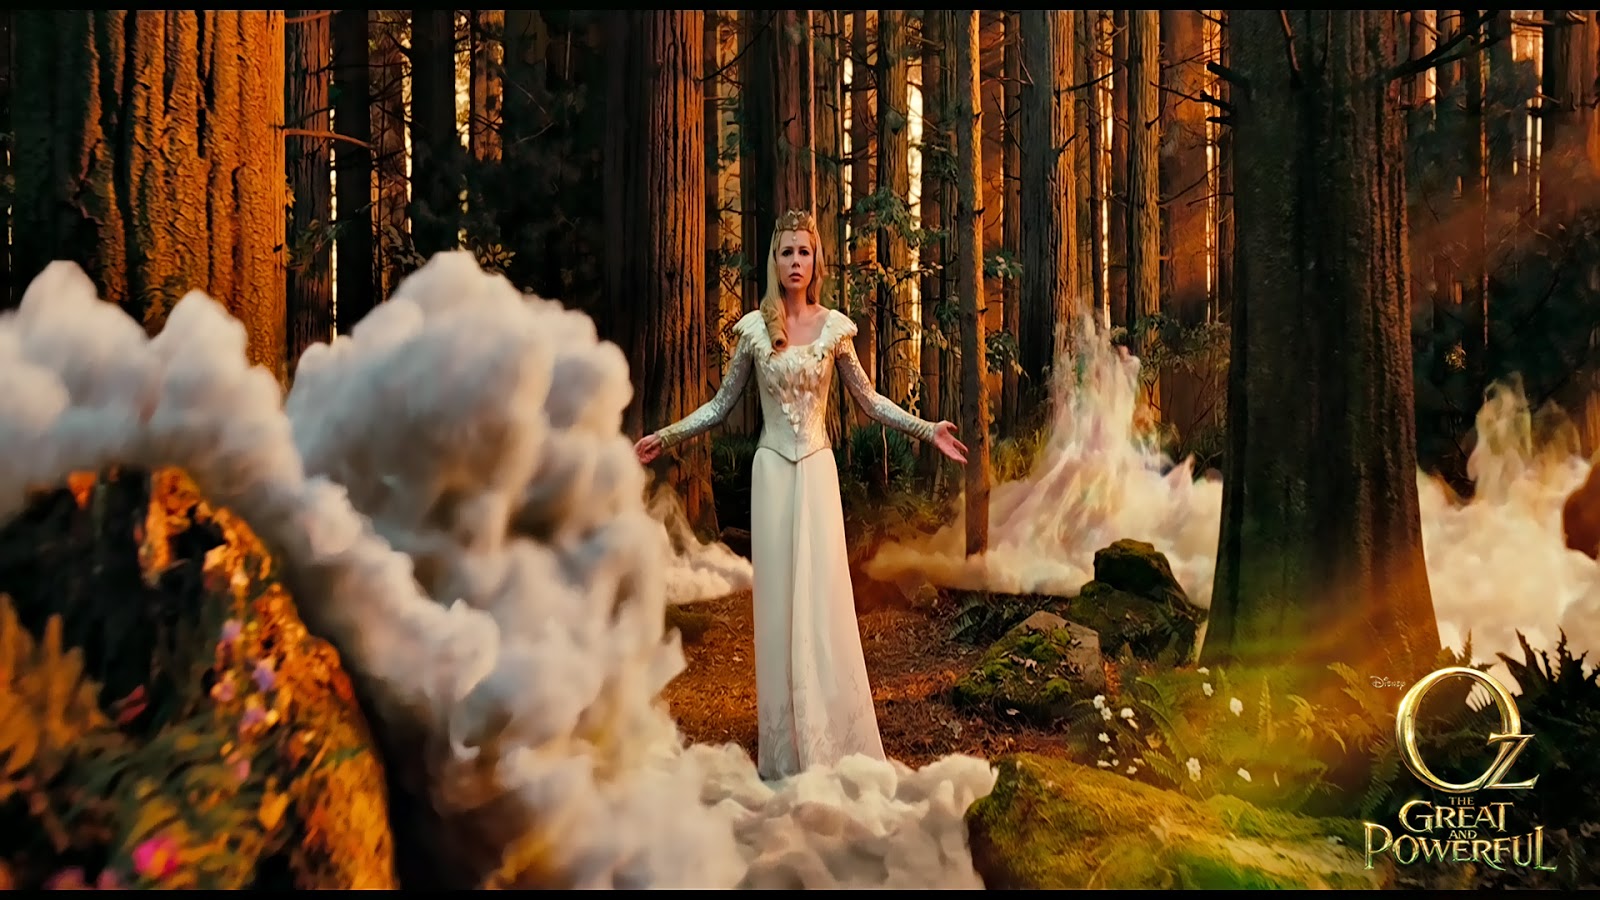 oz great and powerful 2013 dual audio in hindi 720p 14